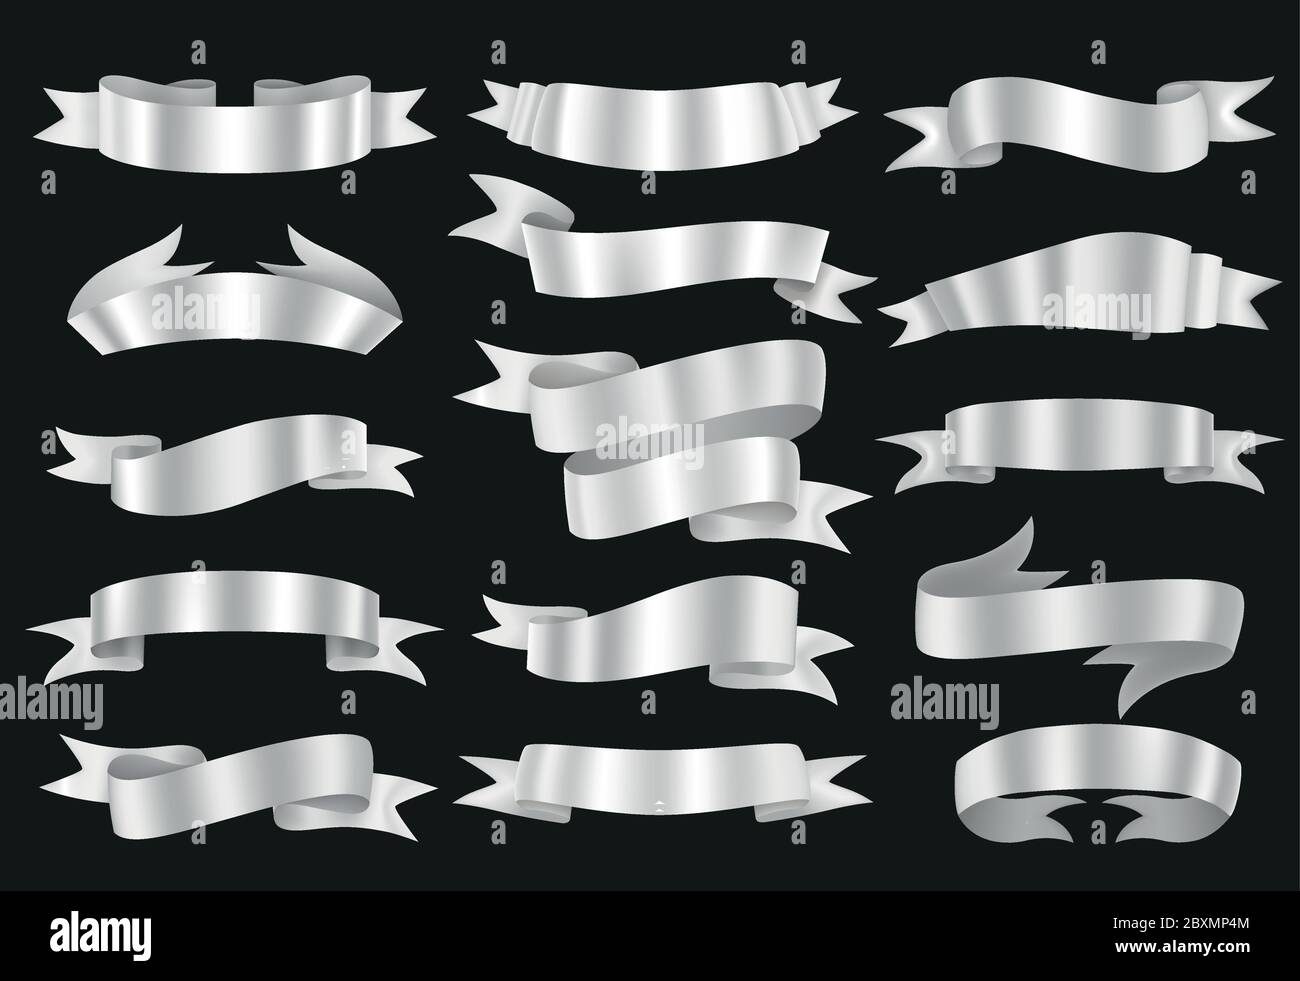 Silver ribbon banners collection. Vector illustration for advertising luxury style. Stock Vector